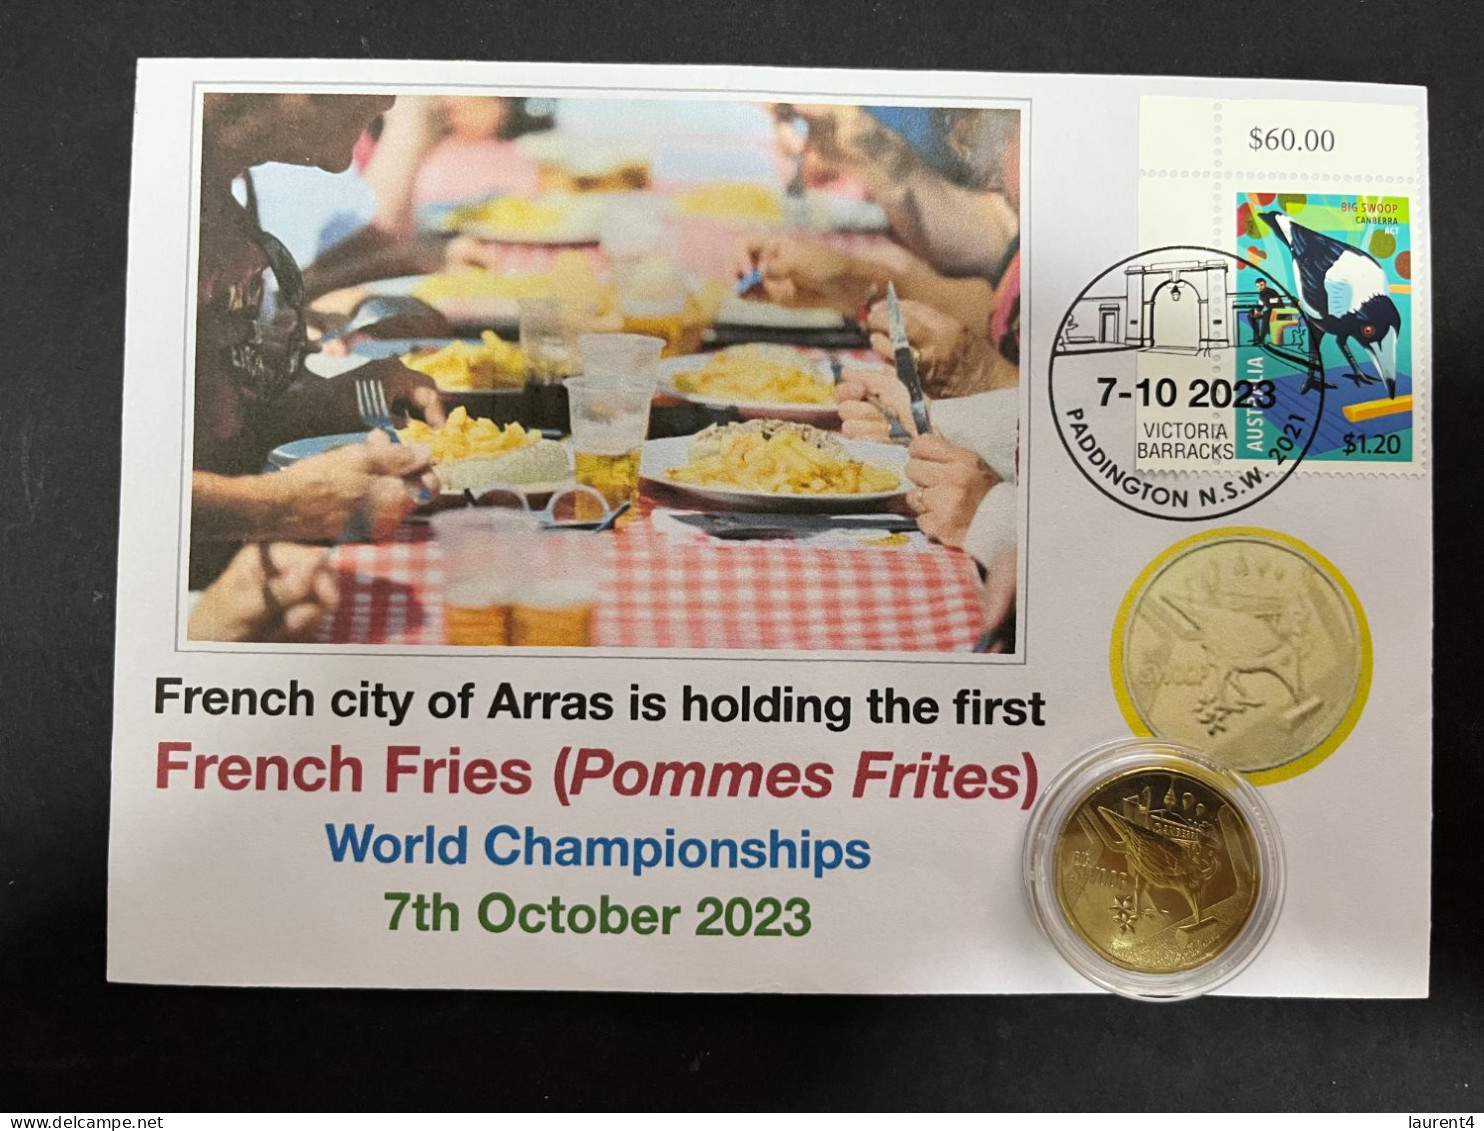 6-5-2024 (6-5-2024) Big Swoop (with French Fries) For French Fries (Frites) 1st World Championship In Arras - Dollar